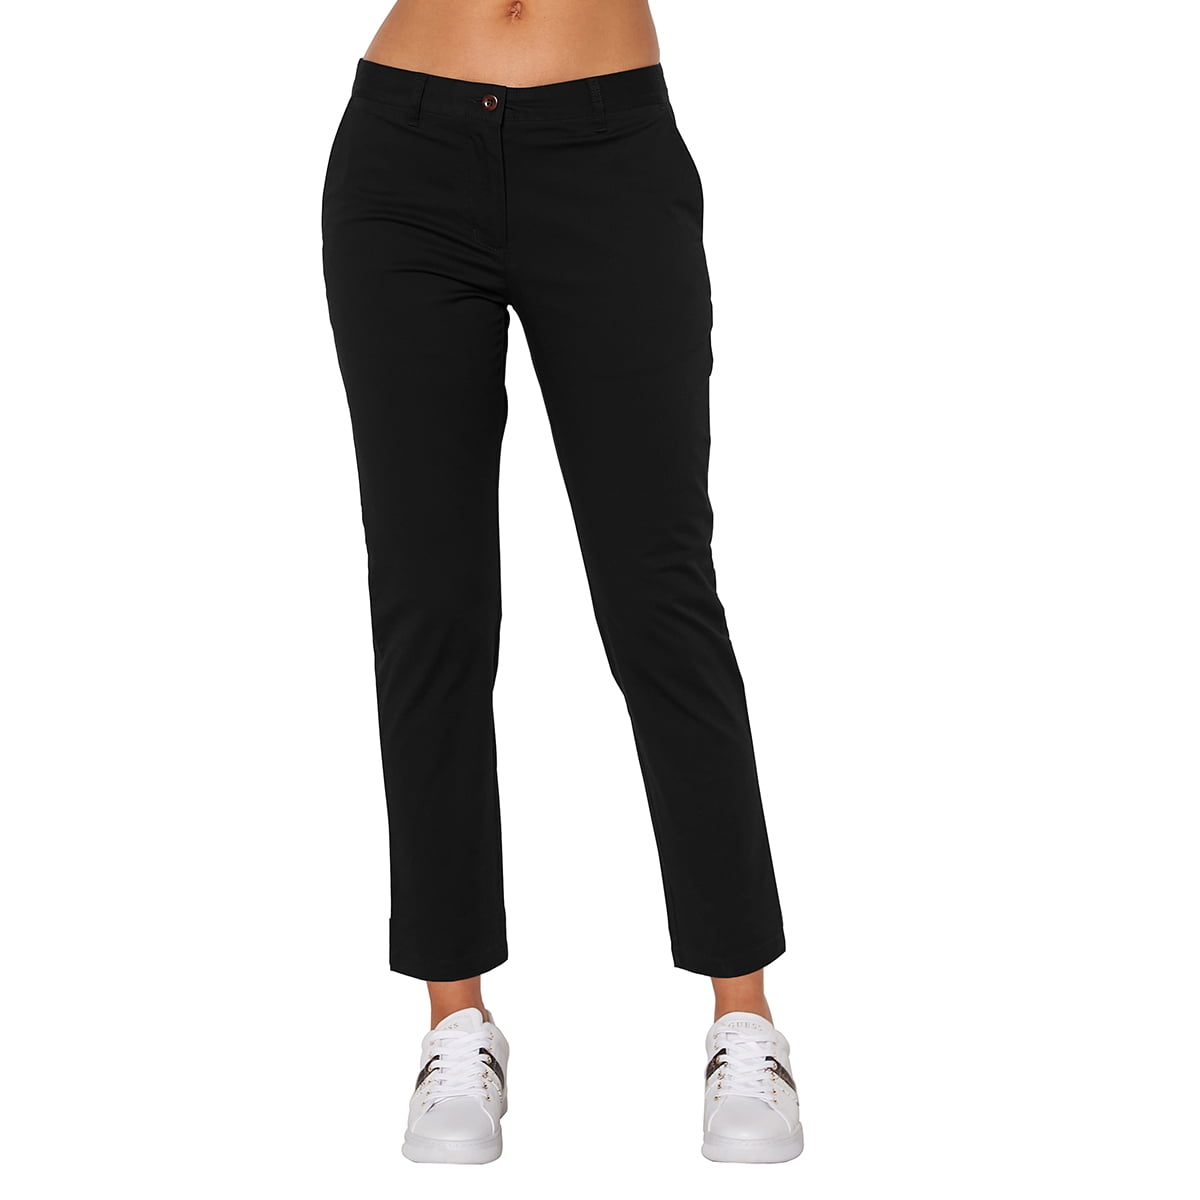 Buy New Slim Ladies Office Pants Fashion Checkered Career Trousers Women  from Dongguan Haohoo Clothing Co., Ltd., China